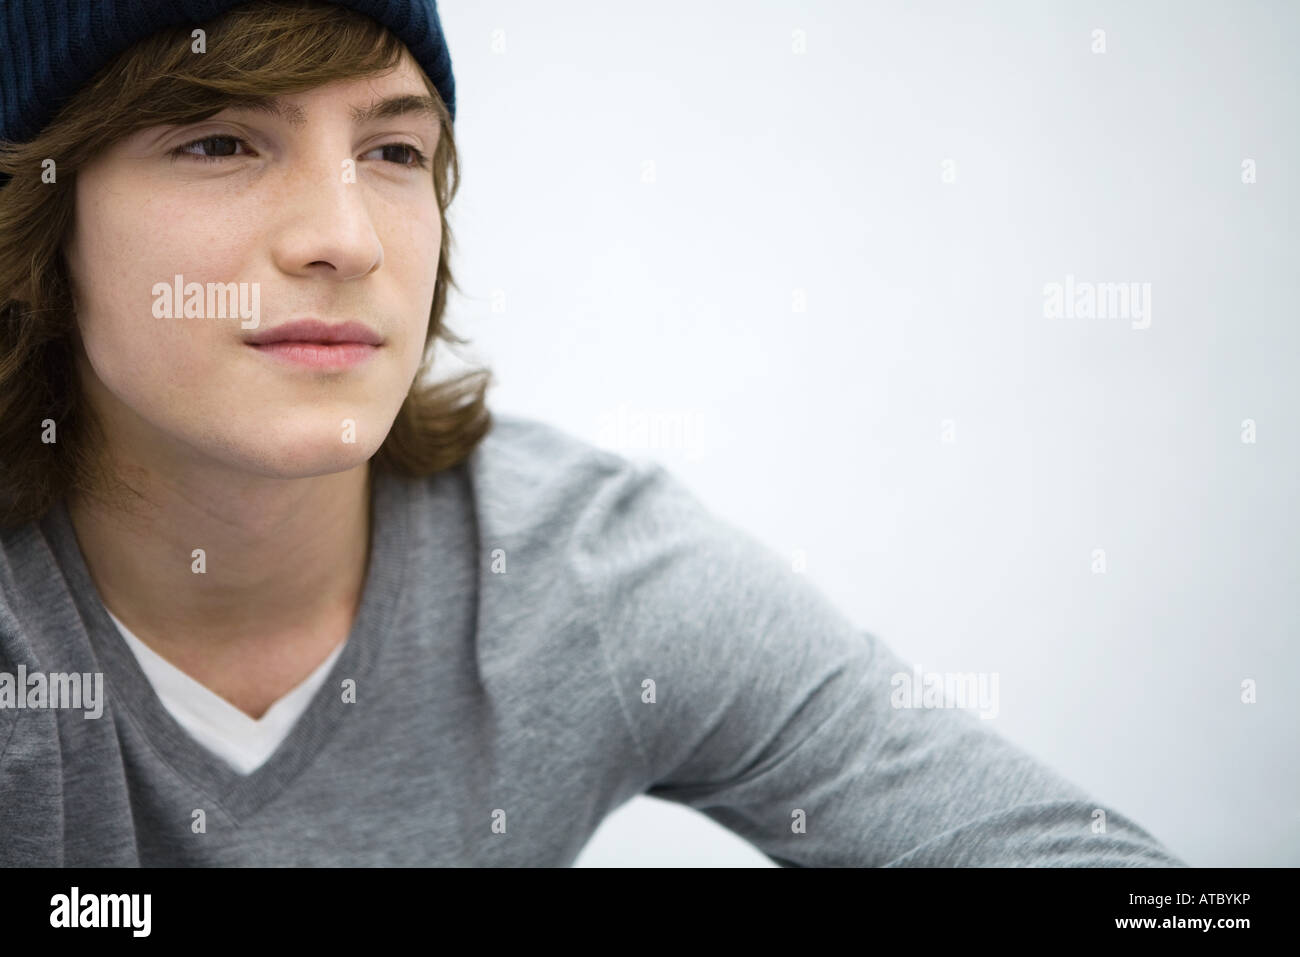 Young man looking away, portrait, close-up Stock Photo